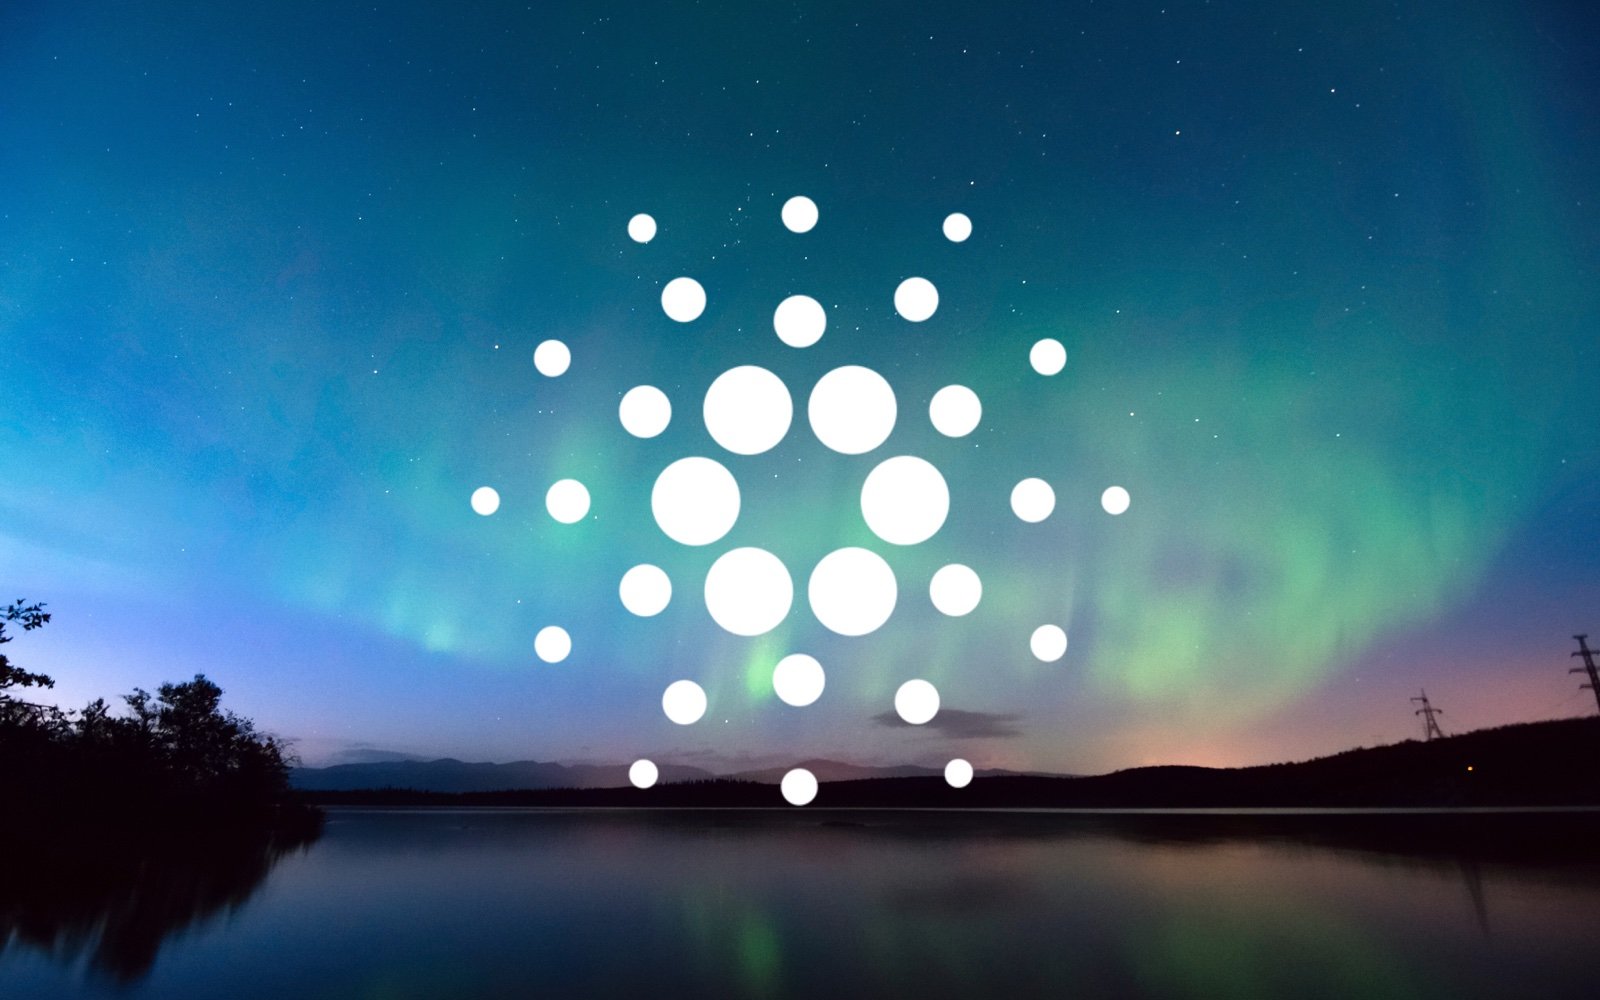 Cardano - De volgende Bitcoin: Cardano is Ethereum, maar dan anders : It combines pioneering technologies to provide unparalleled security and sustainability to decentralized applications, systems, and societies.